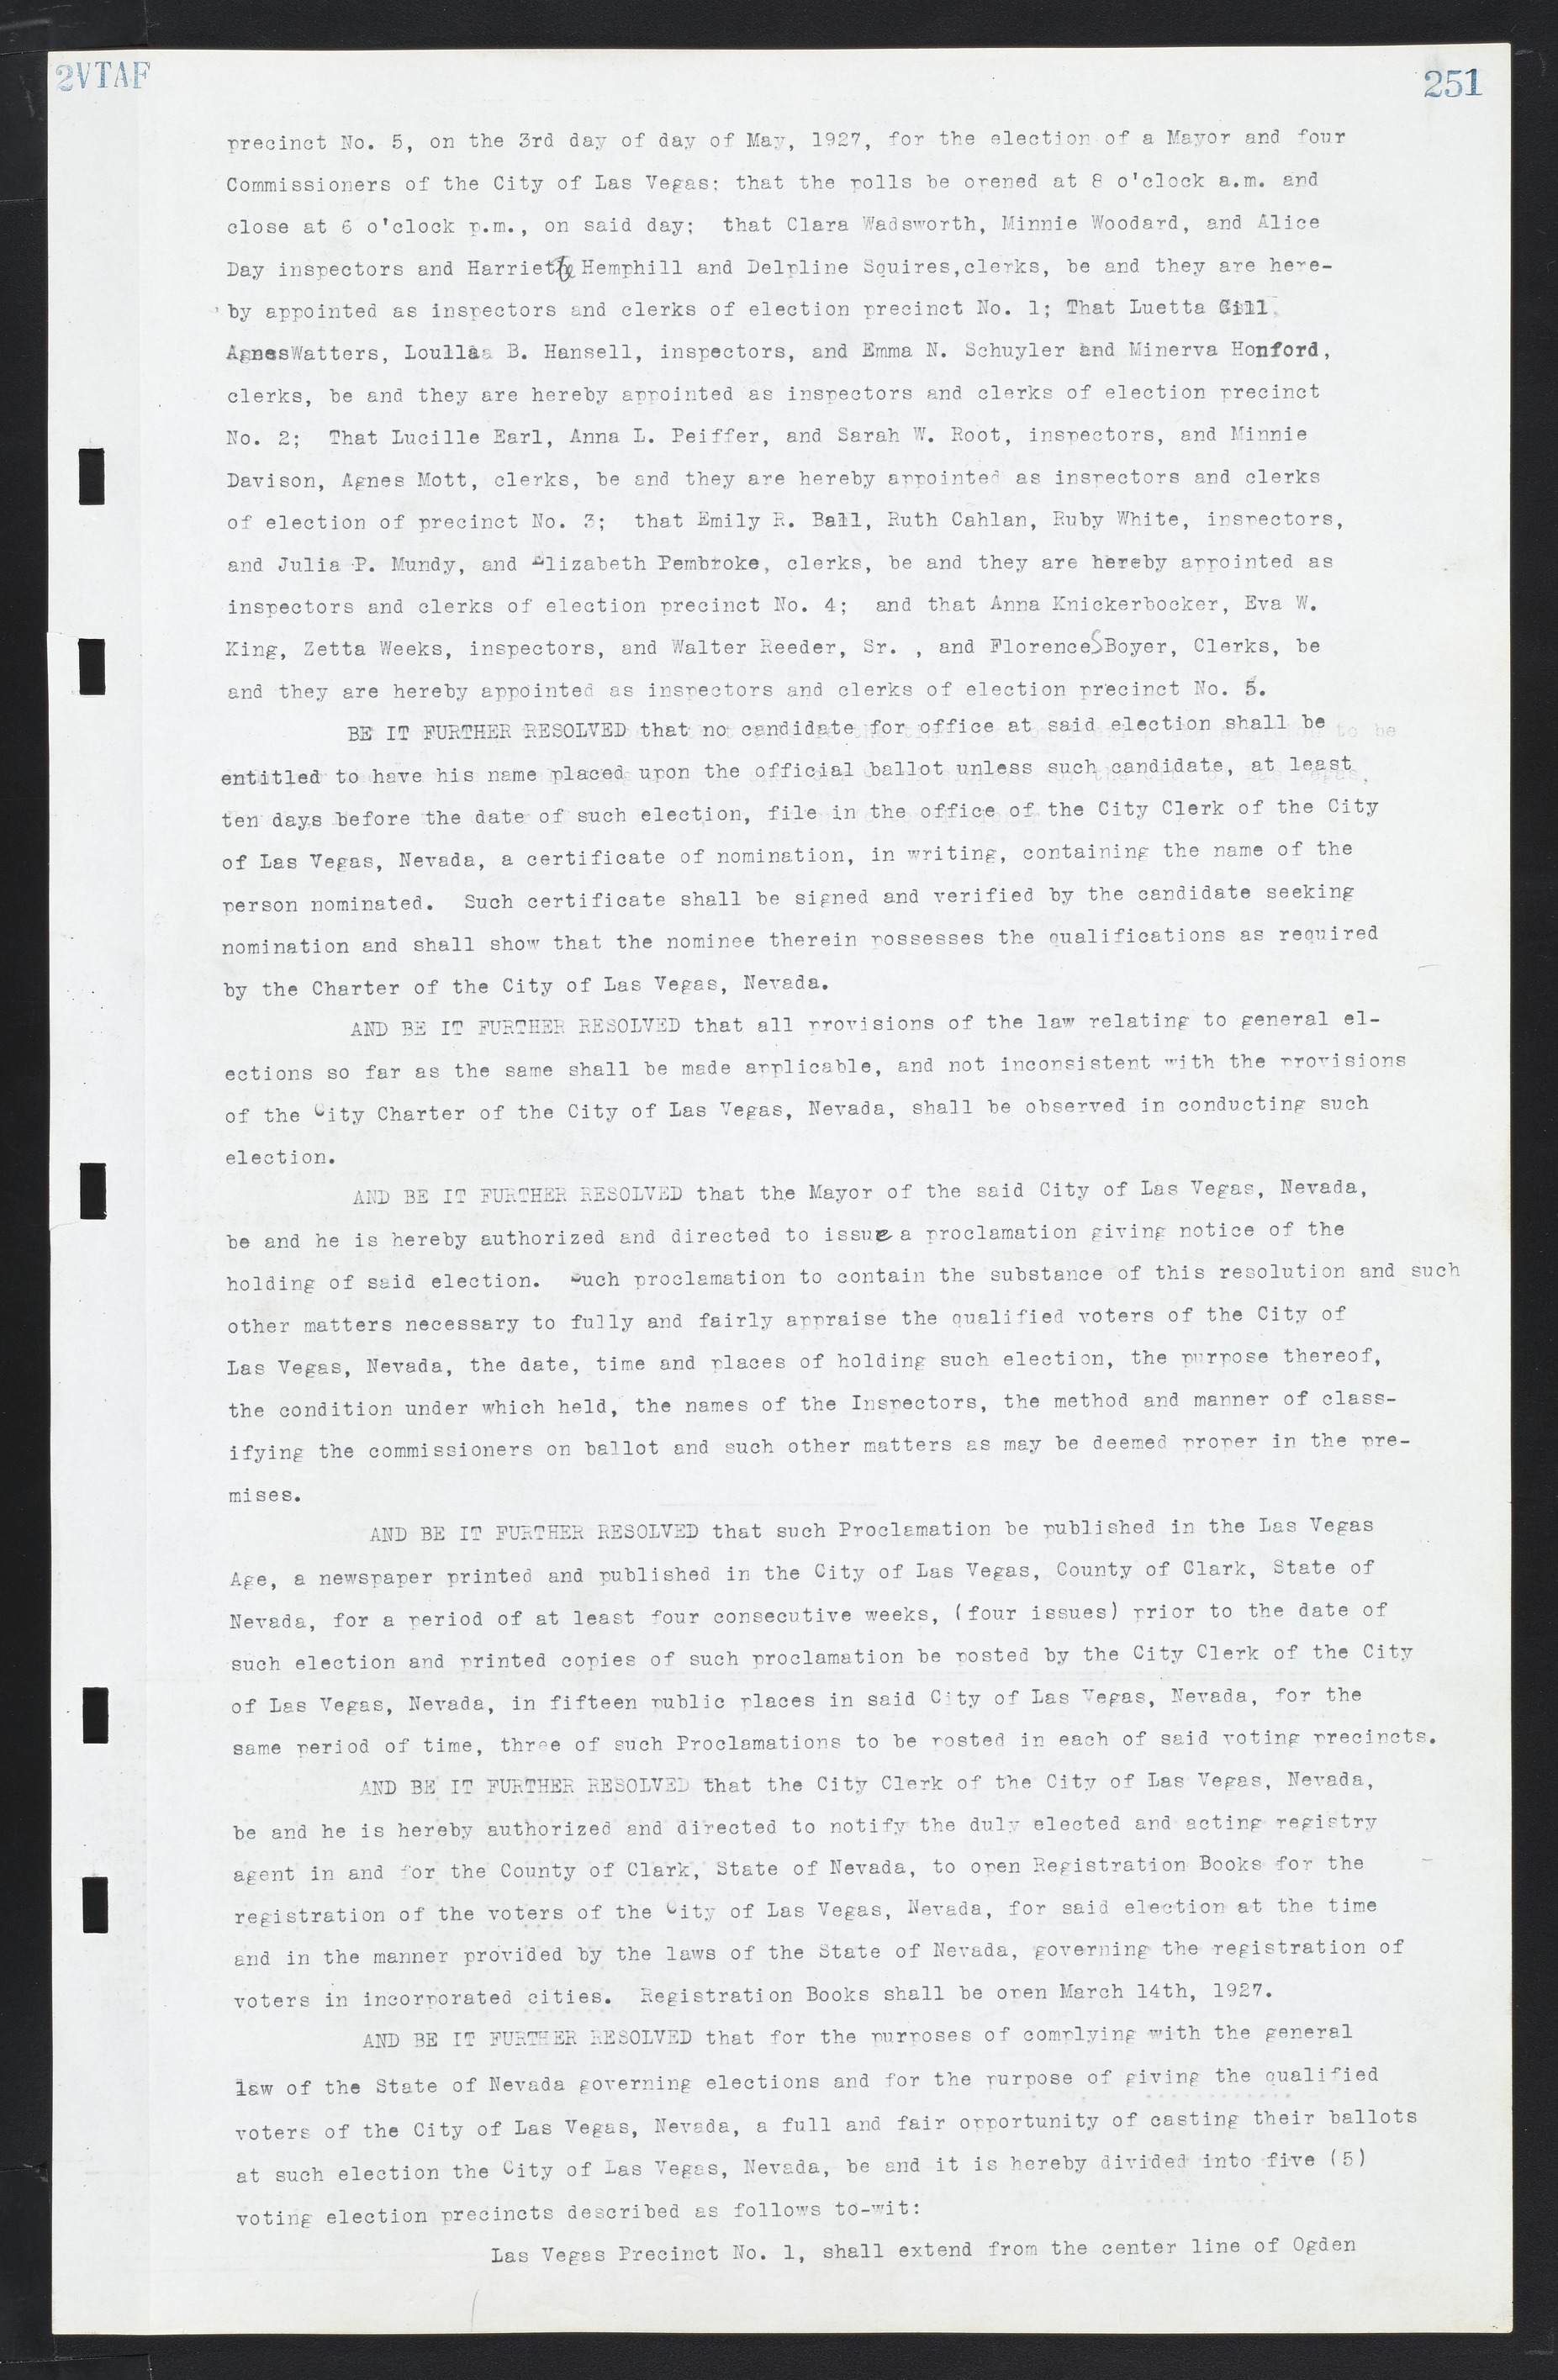 Las Vegas City Commission Minutes, March 1, 1922 to May 10, 1929, lvc000002-258